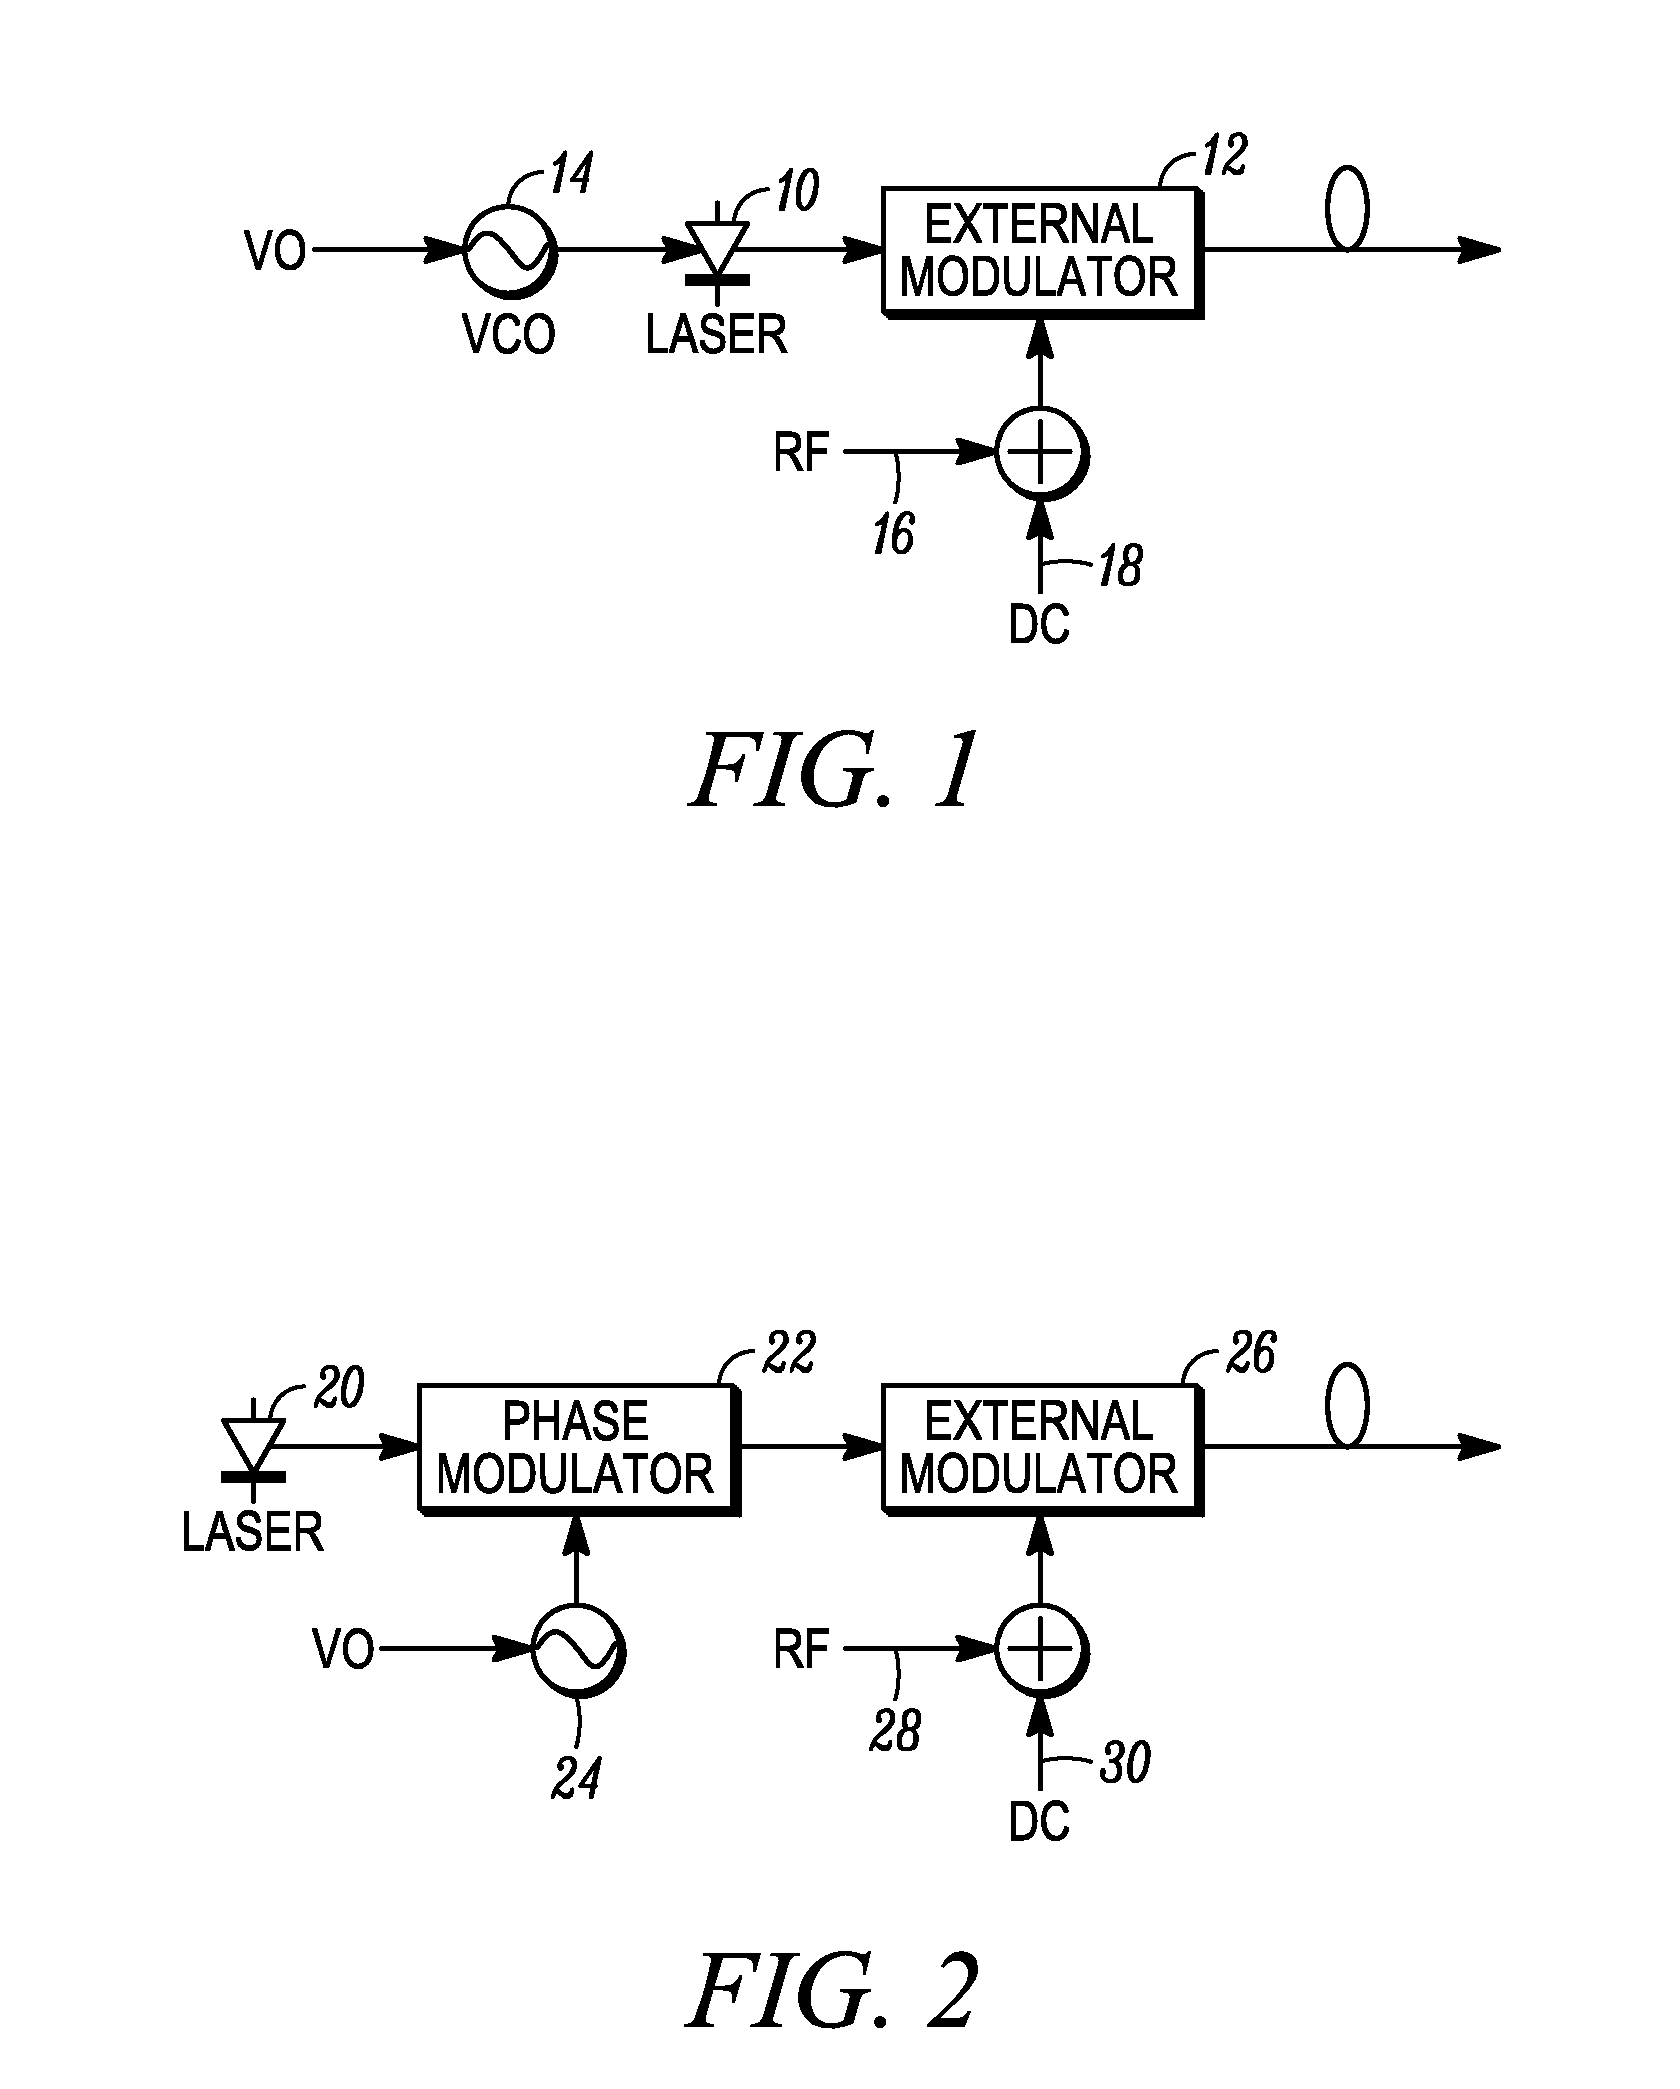 Method and Apparatus for Improved SBS Suppression in Optical Fiber Communication Systems